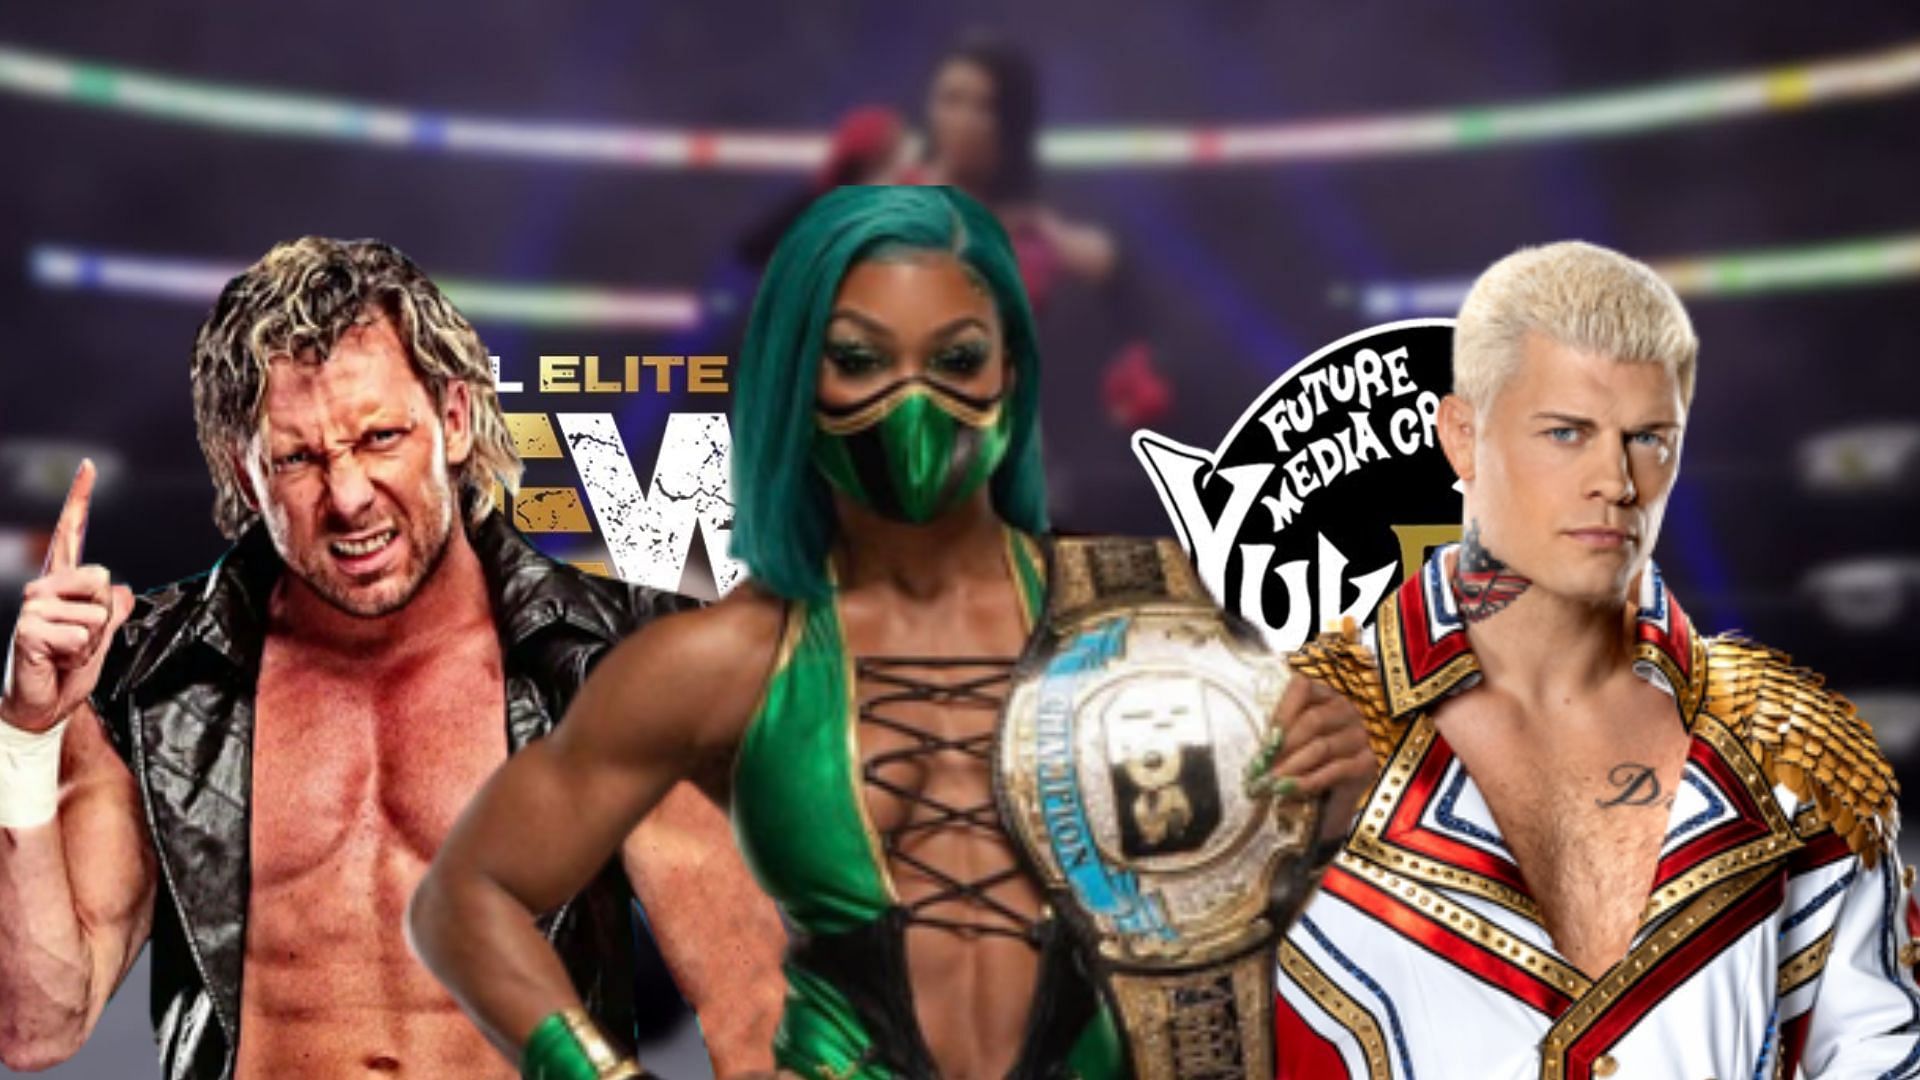 The upcoming video game promises many current and former All Elite Wrestling stars